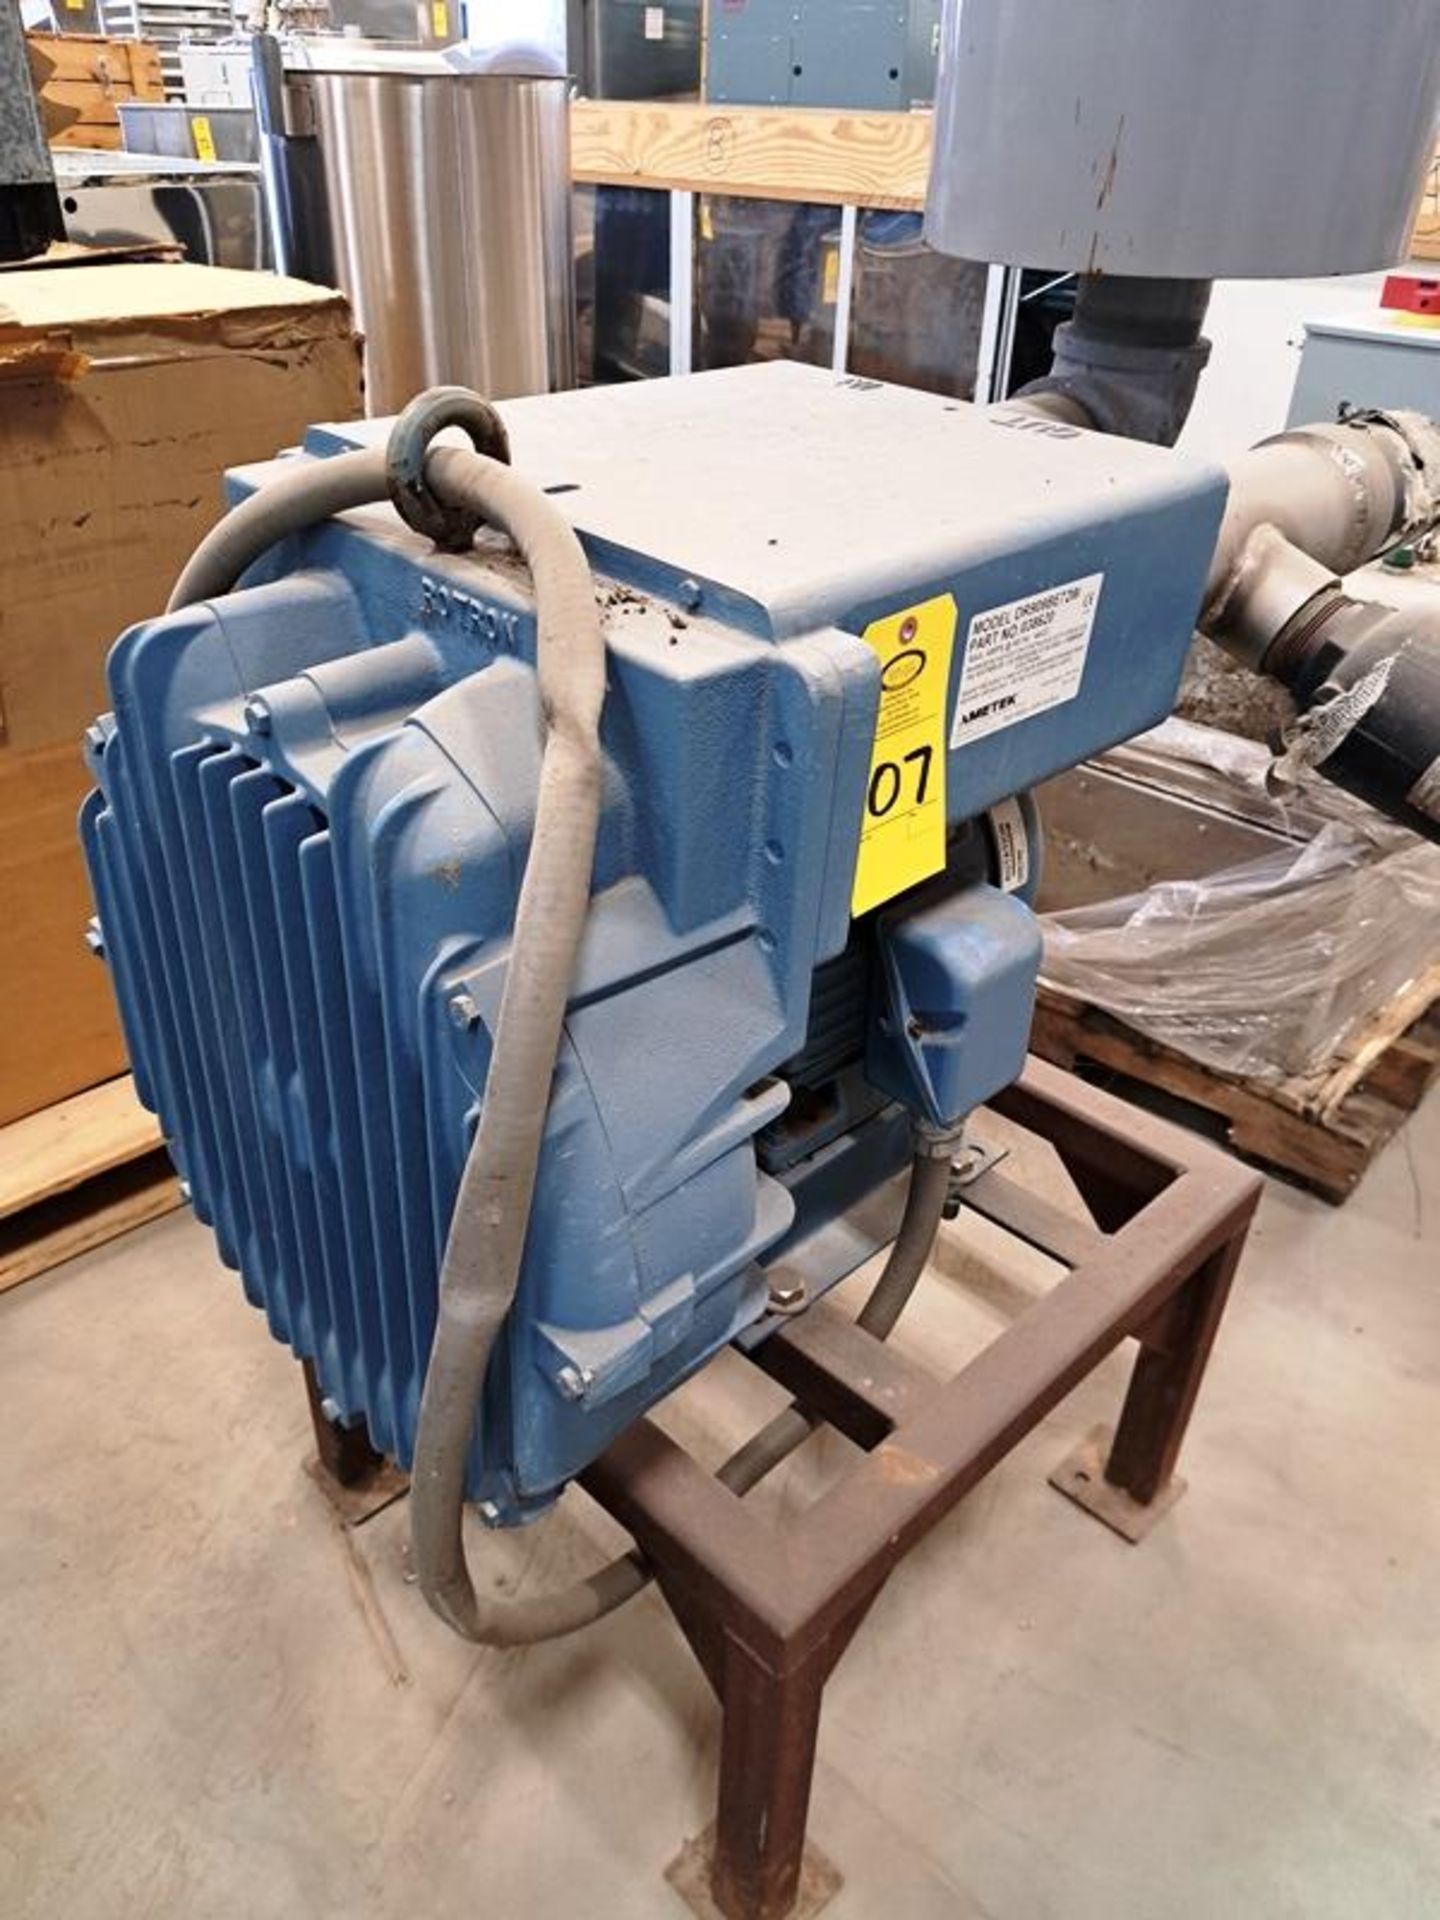 Ametek Mdl. DR909BE72W Vacuum Pump, 230/460 volts, 3 phase (Required Loading Fee: $25.00) NO HAND - Image 3 of 3